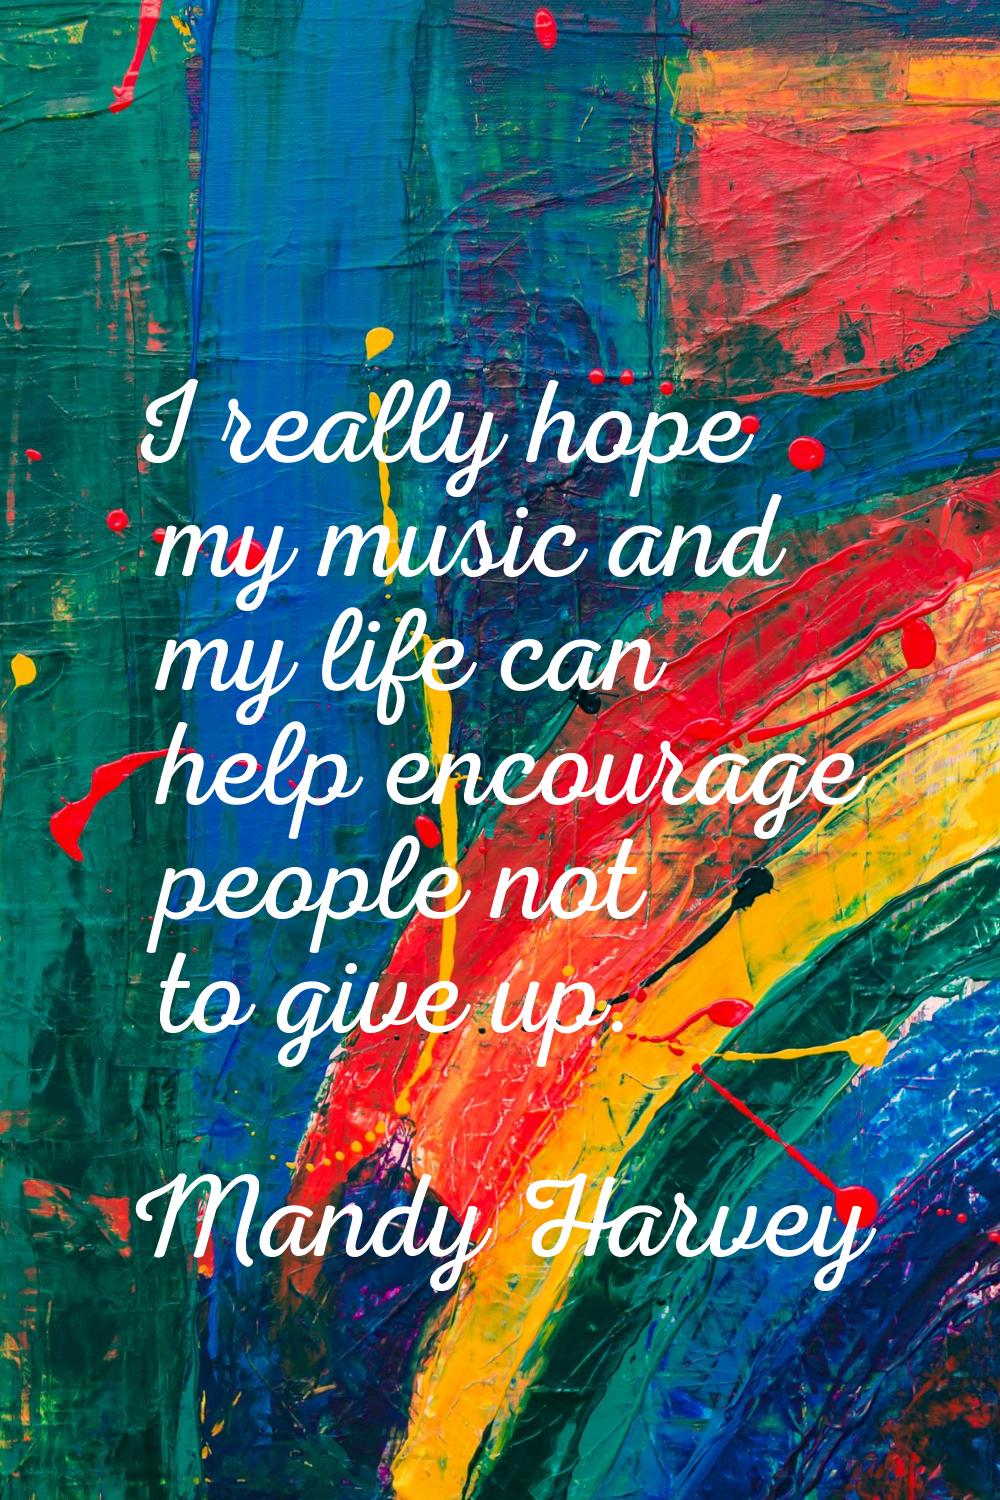 I really hope my music and my life can help encourage people not to give up.